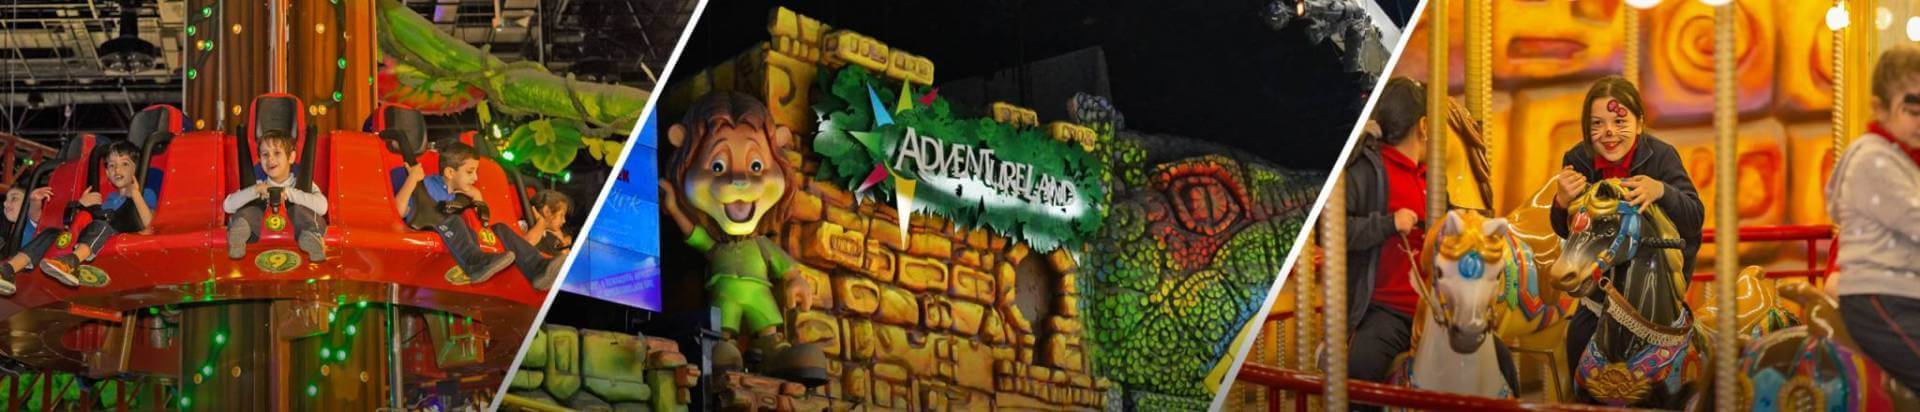 Experience the latest thrilling rides and video games at Adventureland!